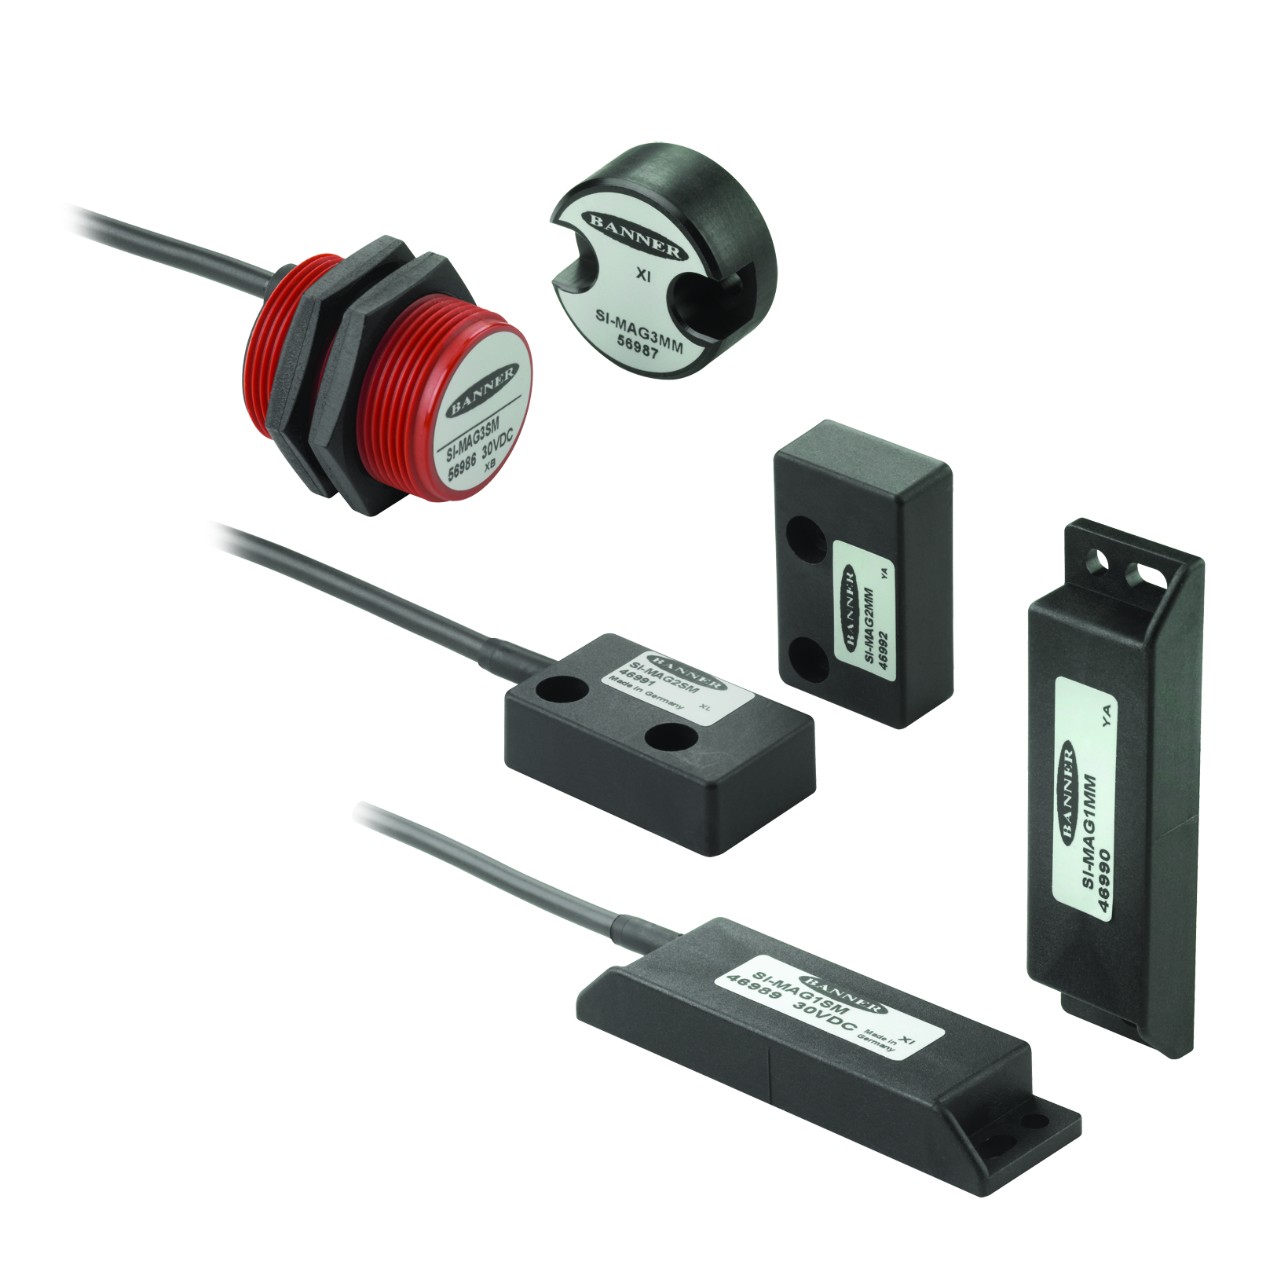 https://0201.nccdn.net/1_2/000/000/0b6/64f/magnet-style-safety-switches-si-mag-series.img.png